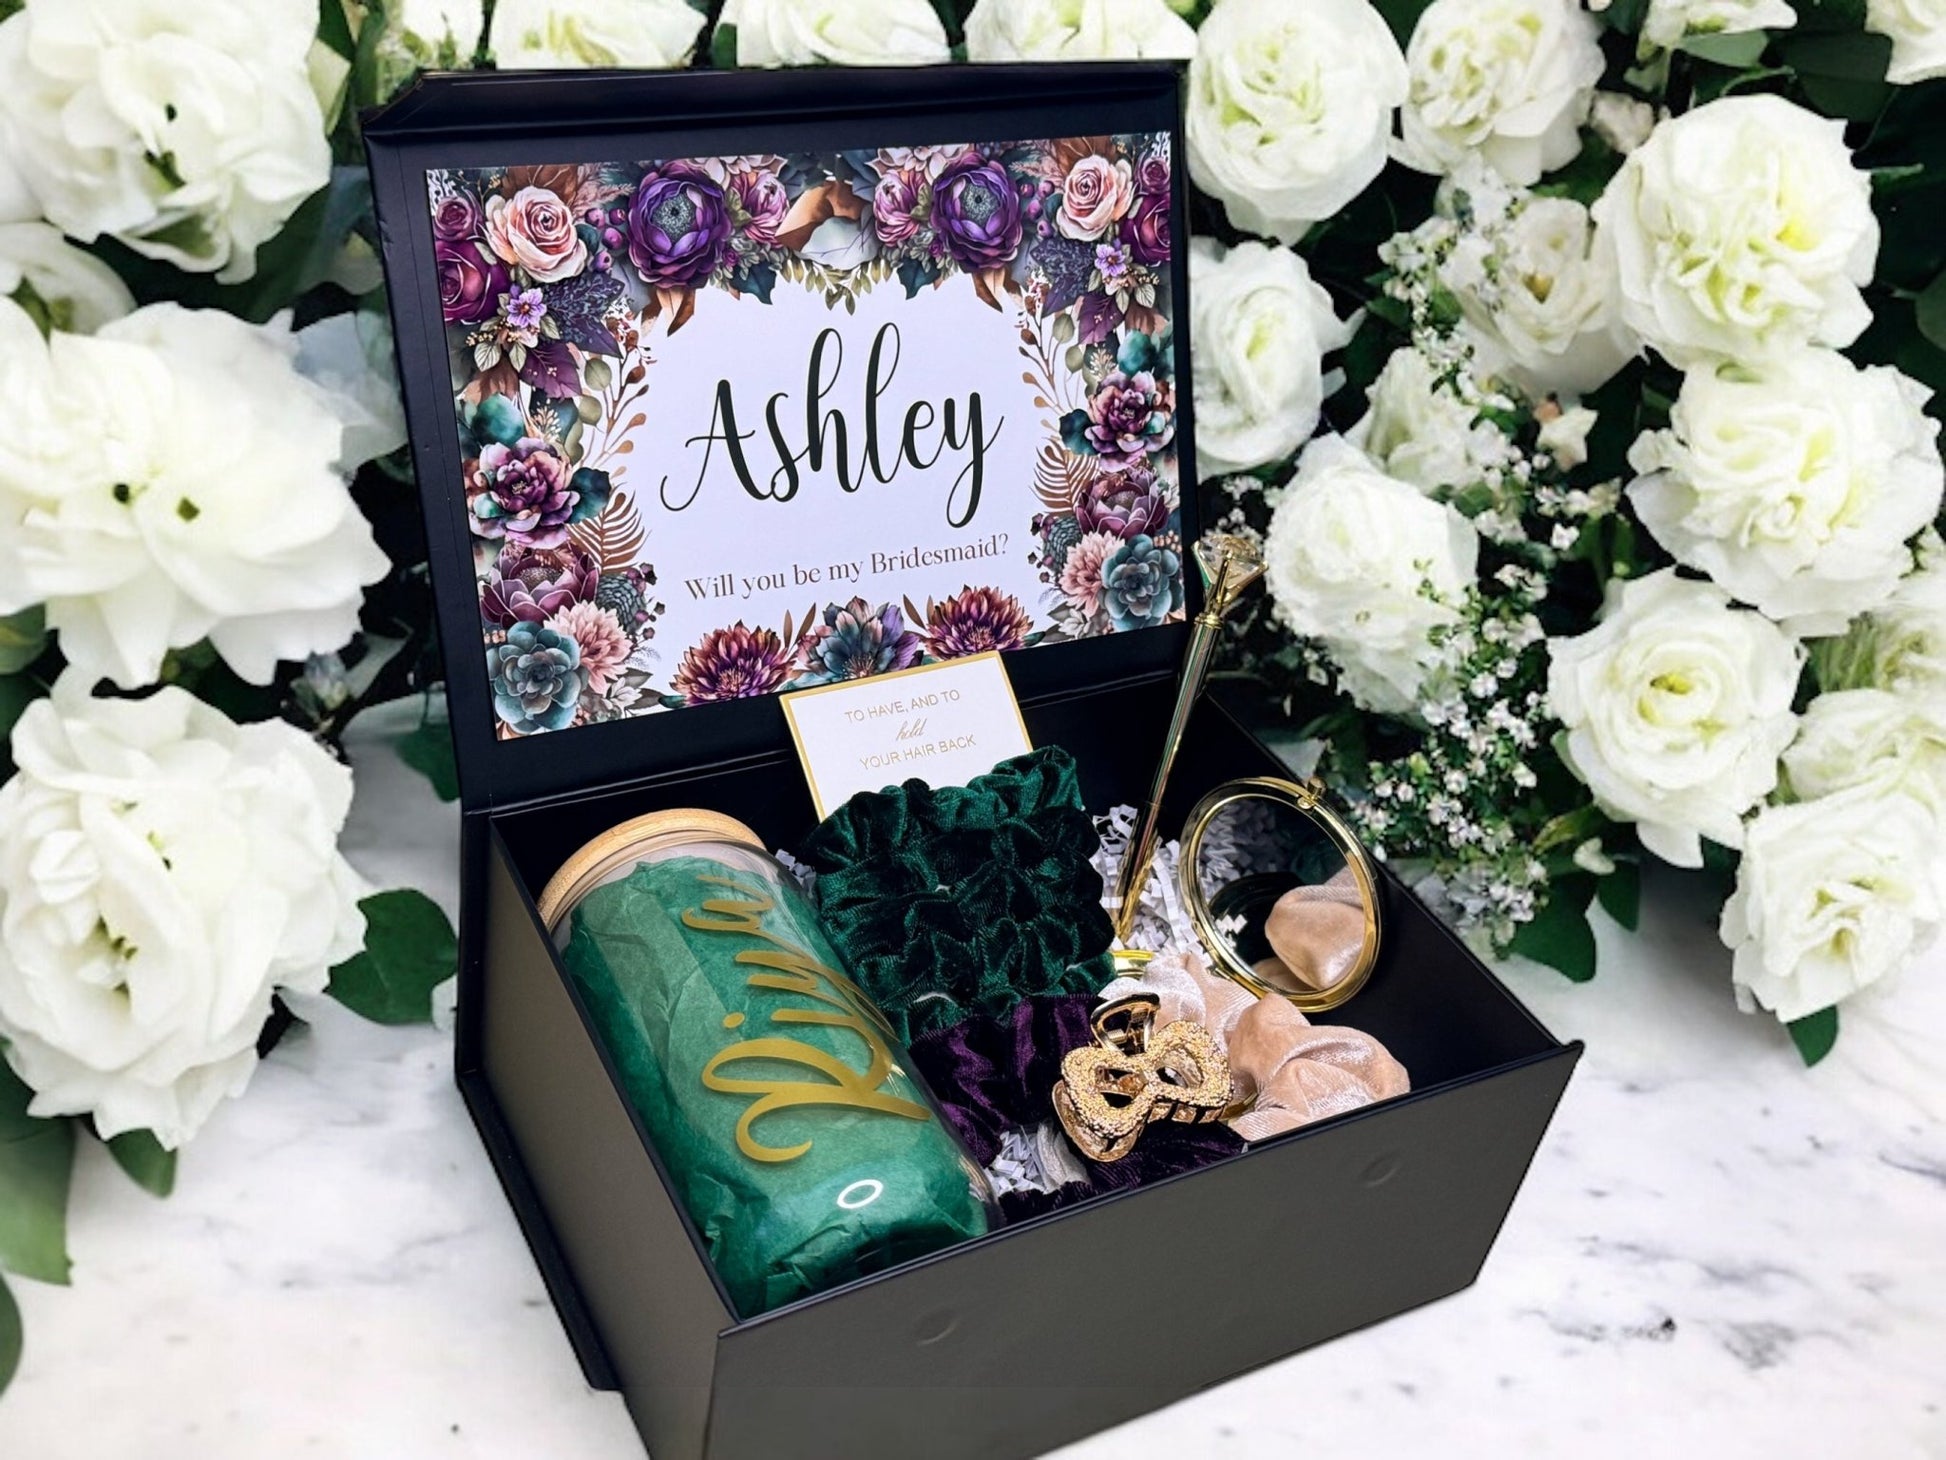 Muave and Emerald floral themed Bridesmaid Proposal Box, Bridesmaid Gift -Box, Bridesmaid Proposal - Box of Love